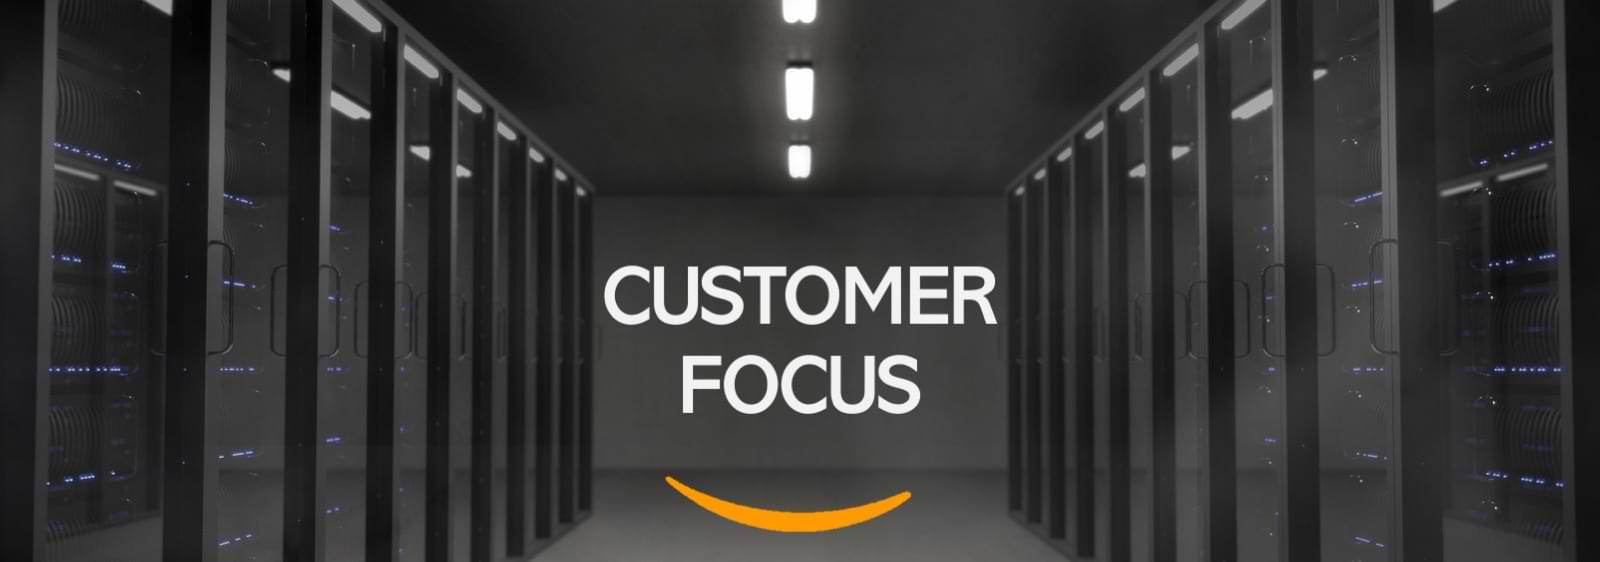 Amazon and its customer-focused approach!